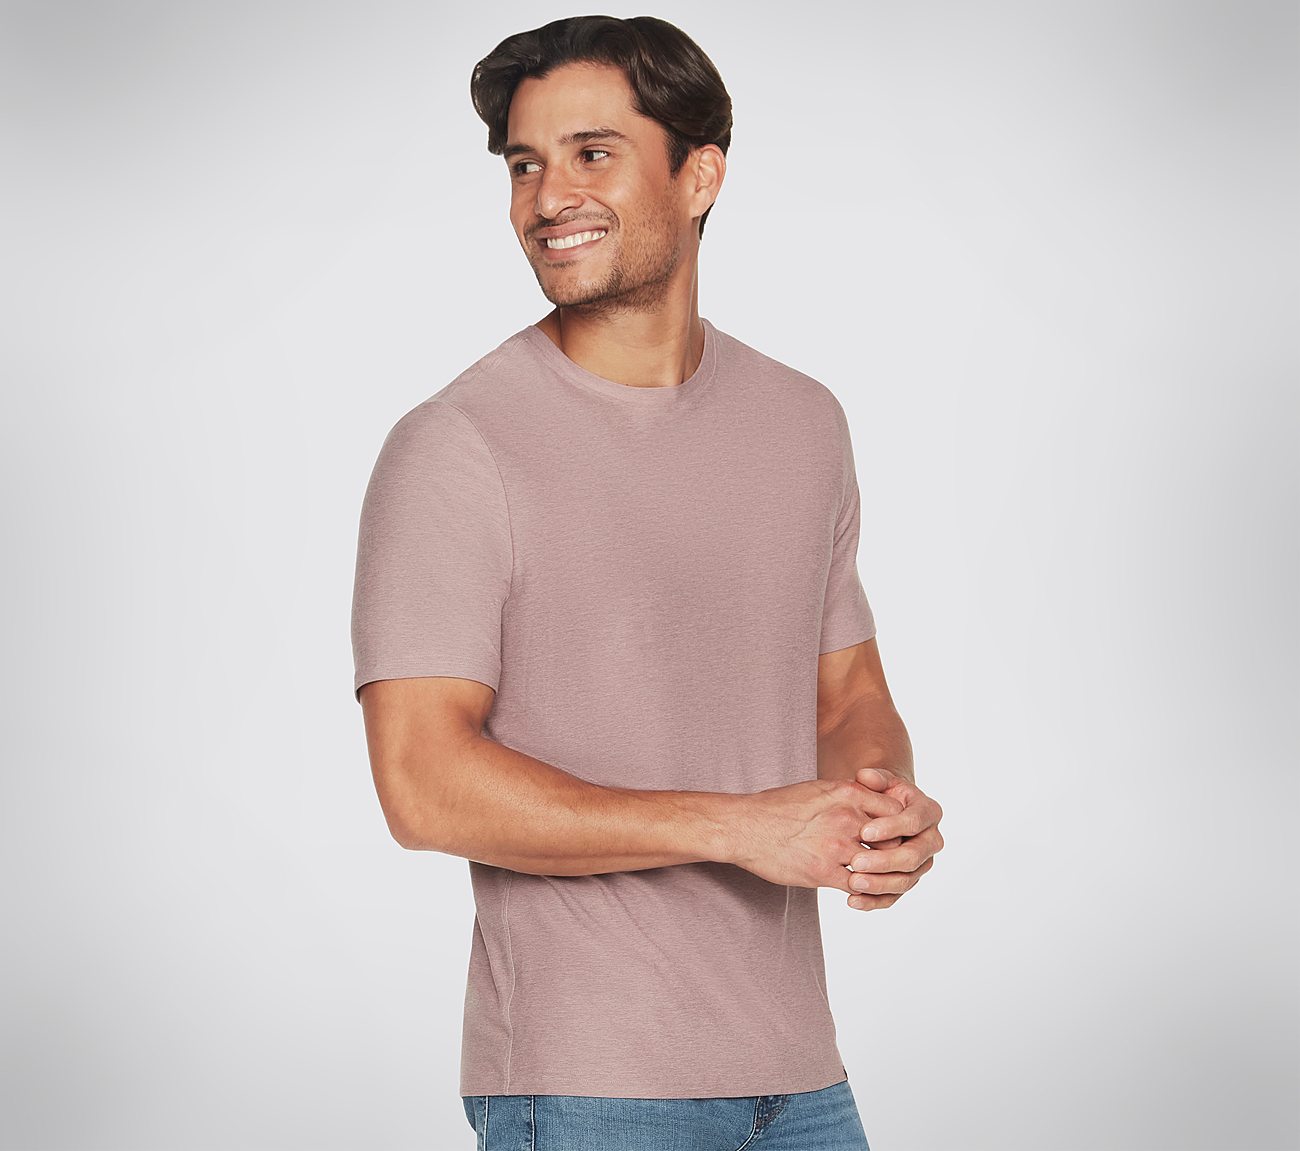 GODRI ALL DAY TEE, TAUPE/LAVENDER Apparels Bottom View